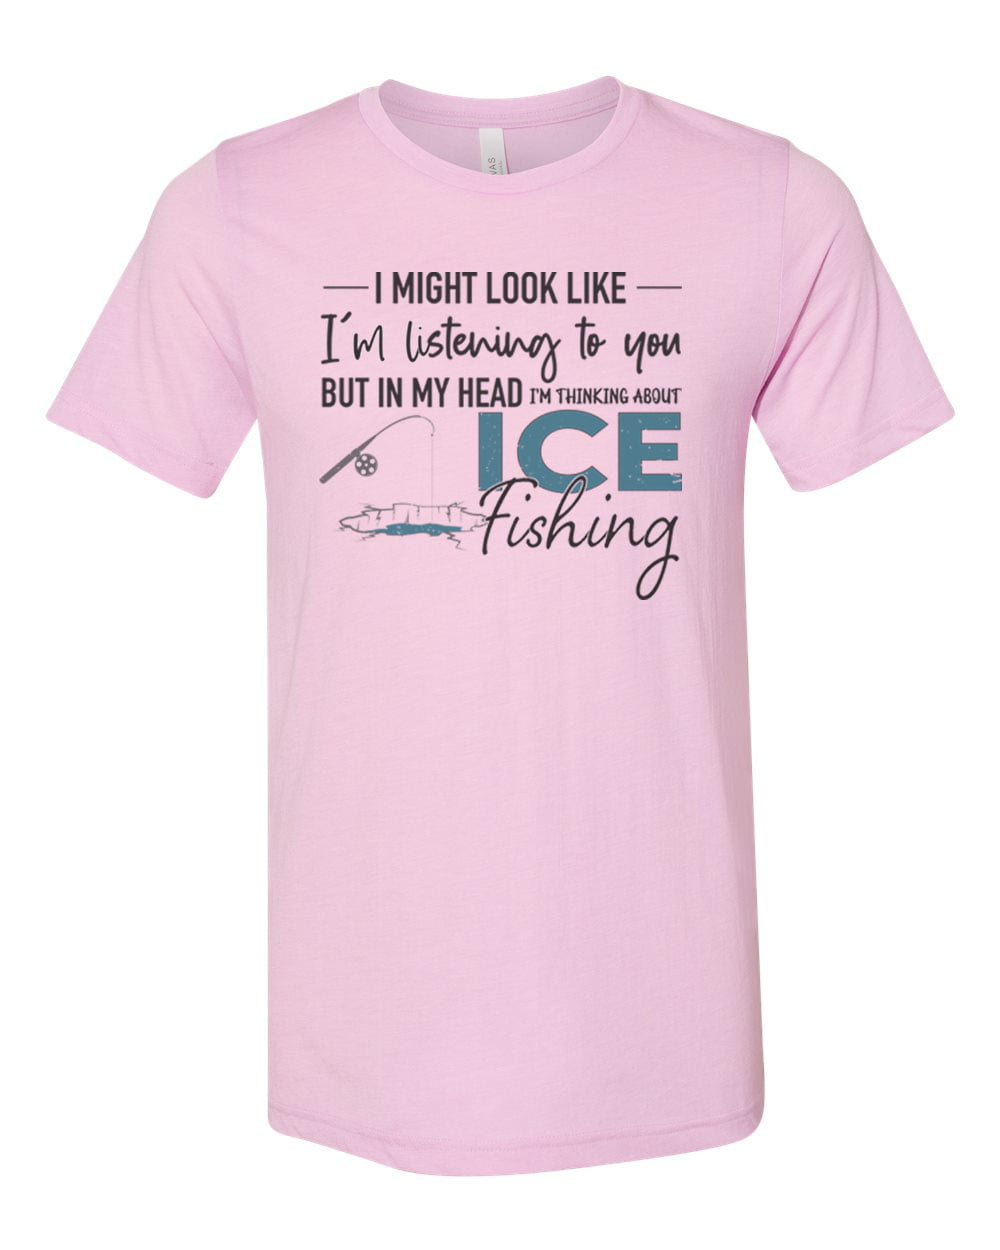 Ice Fishing Shirt, Thinking About Ice Fishing, Fishing Shirt, Unisex Fit,  Gift For Him, Father's Day Gift, Ice Fishing, Walleye Shirt, Pike, Peach,  LARGE 